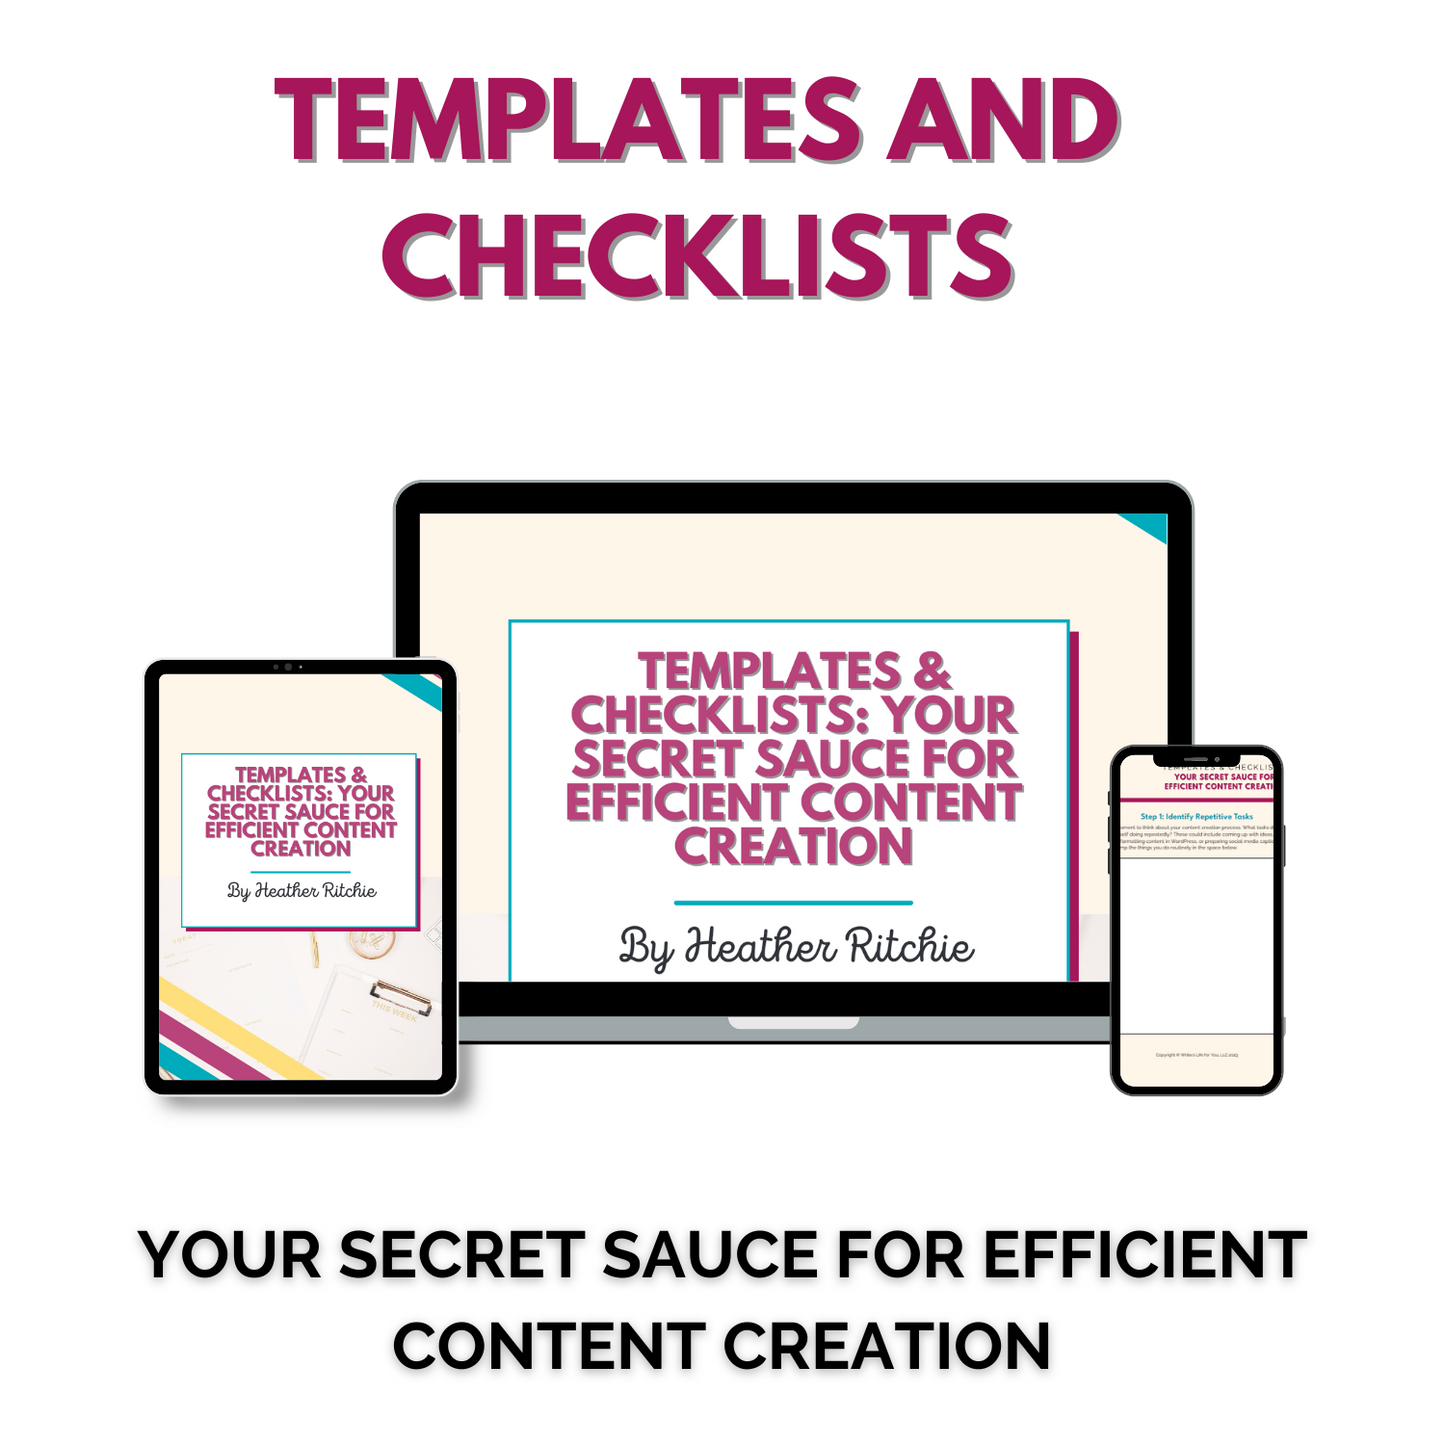 Templates and Checklists: Your Secret Sauce for Efficient Content Creation Workflows